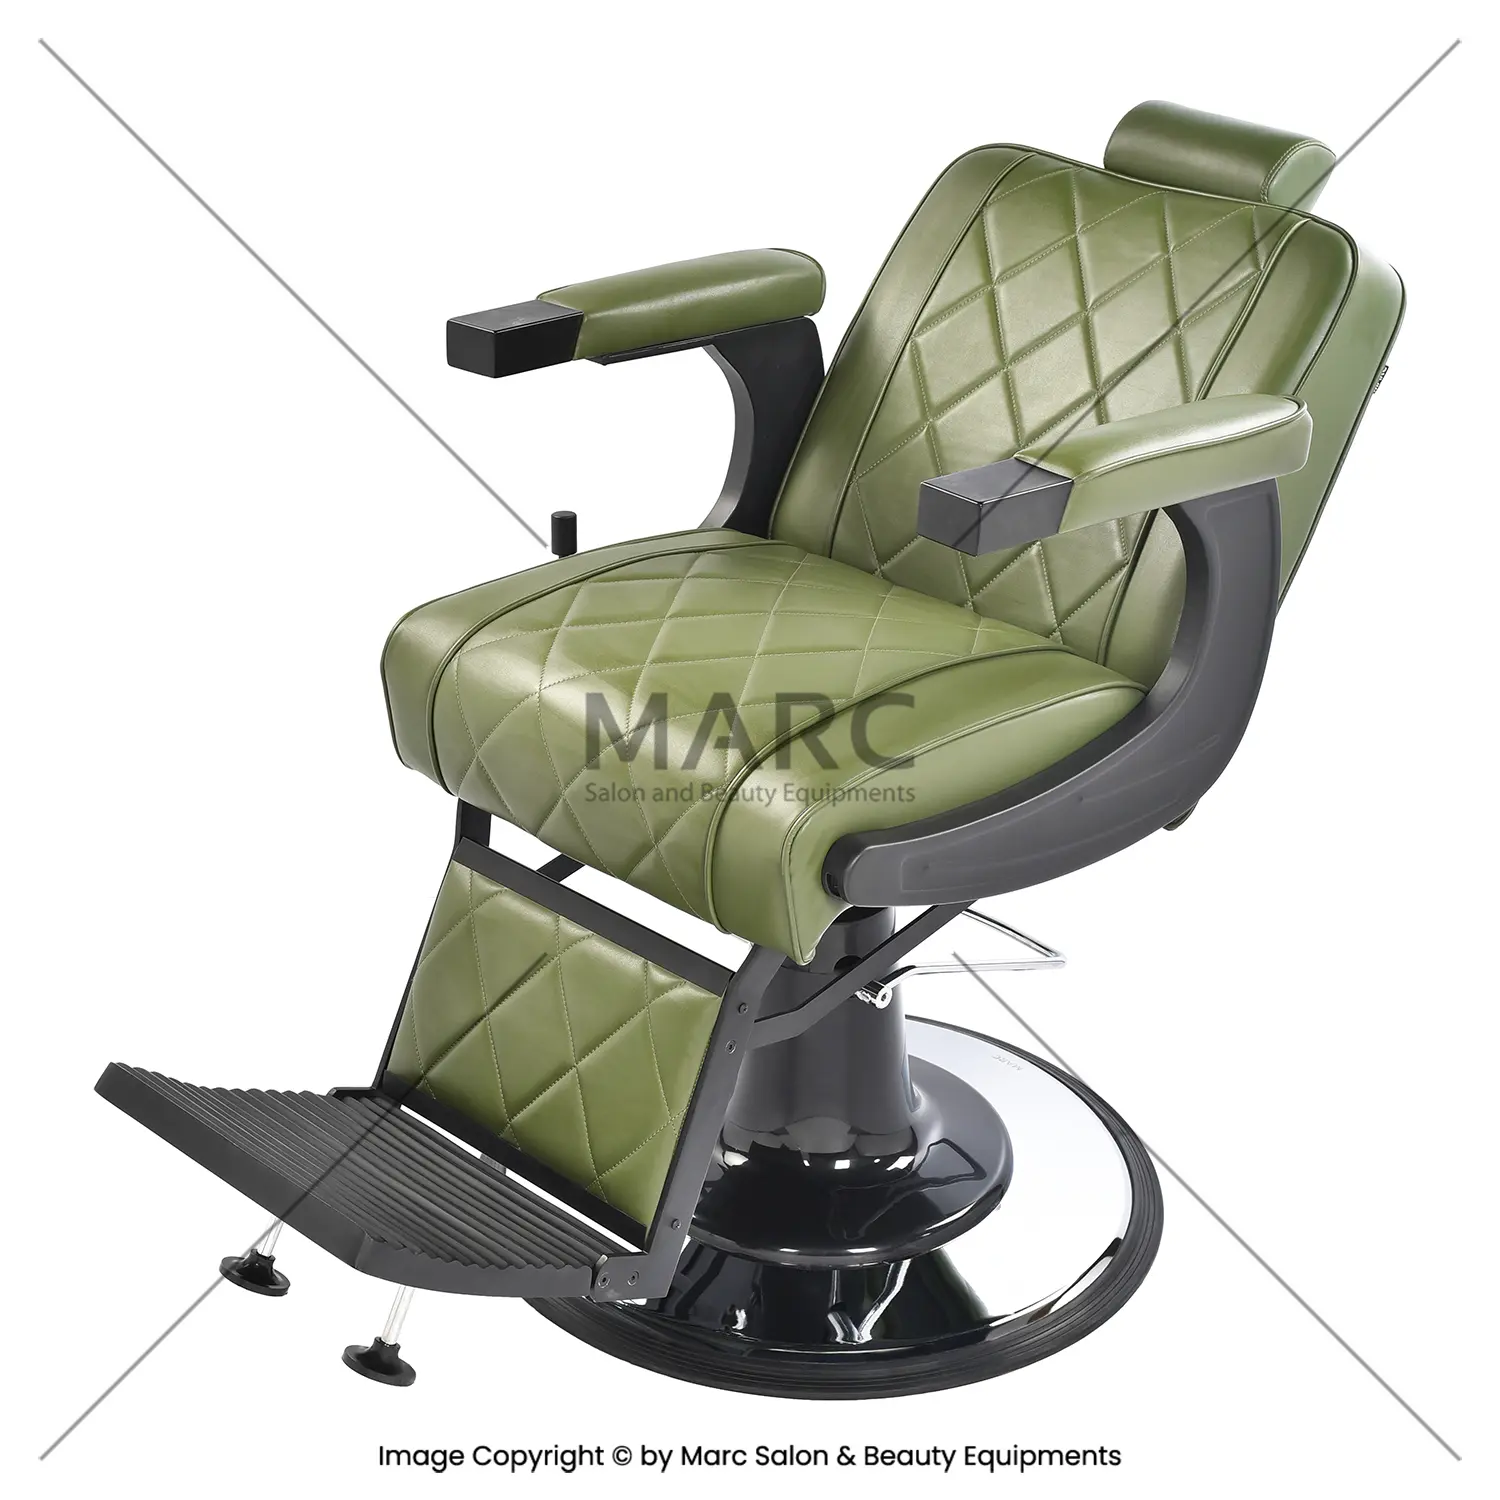 barber chair price in Imphal